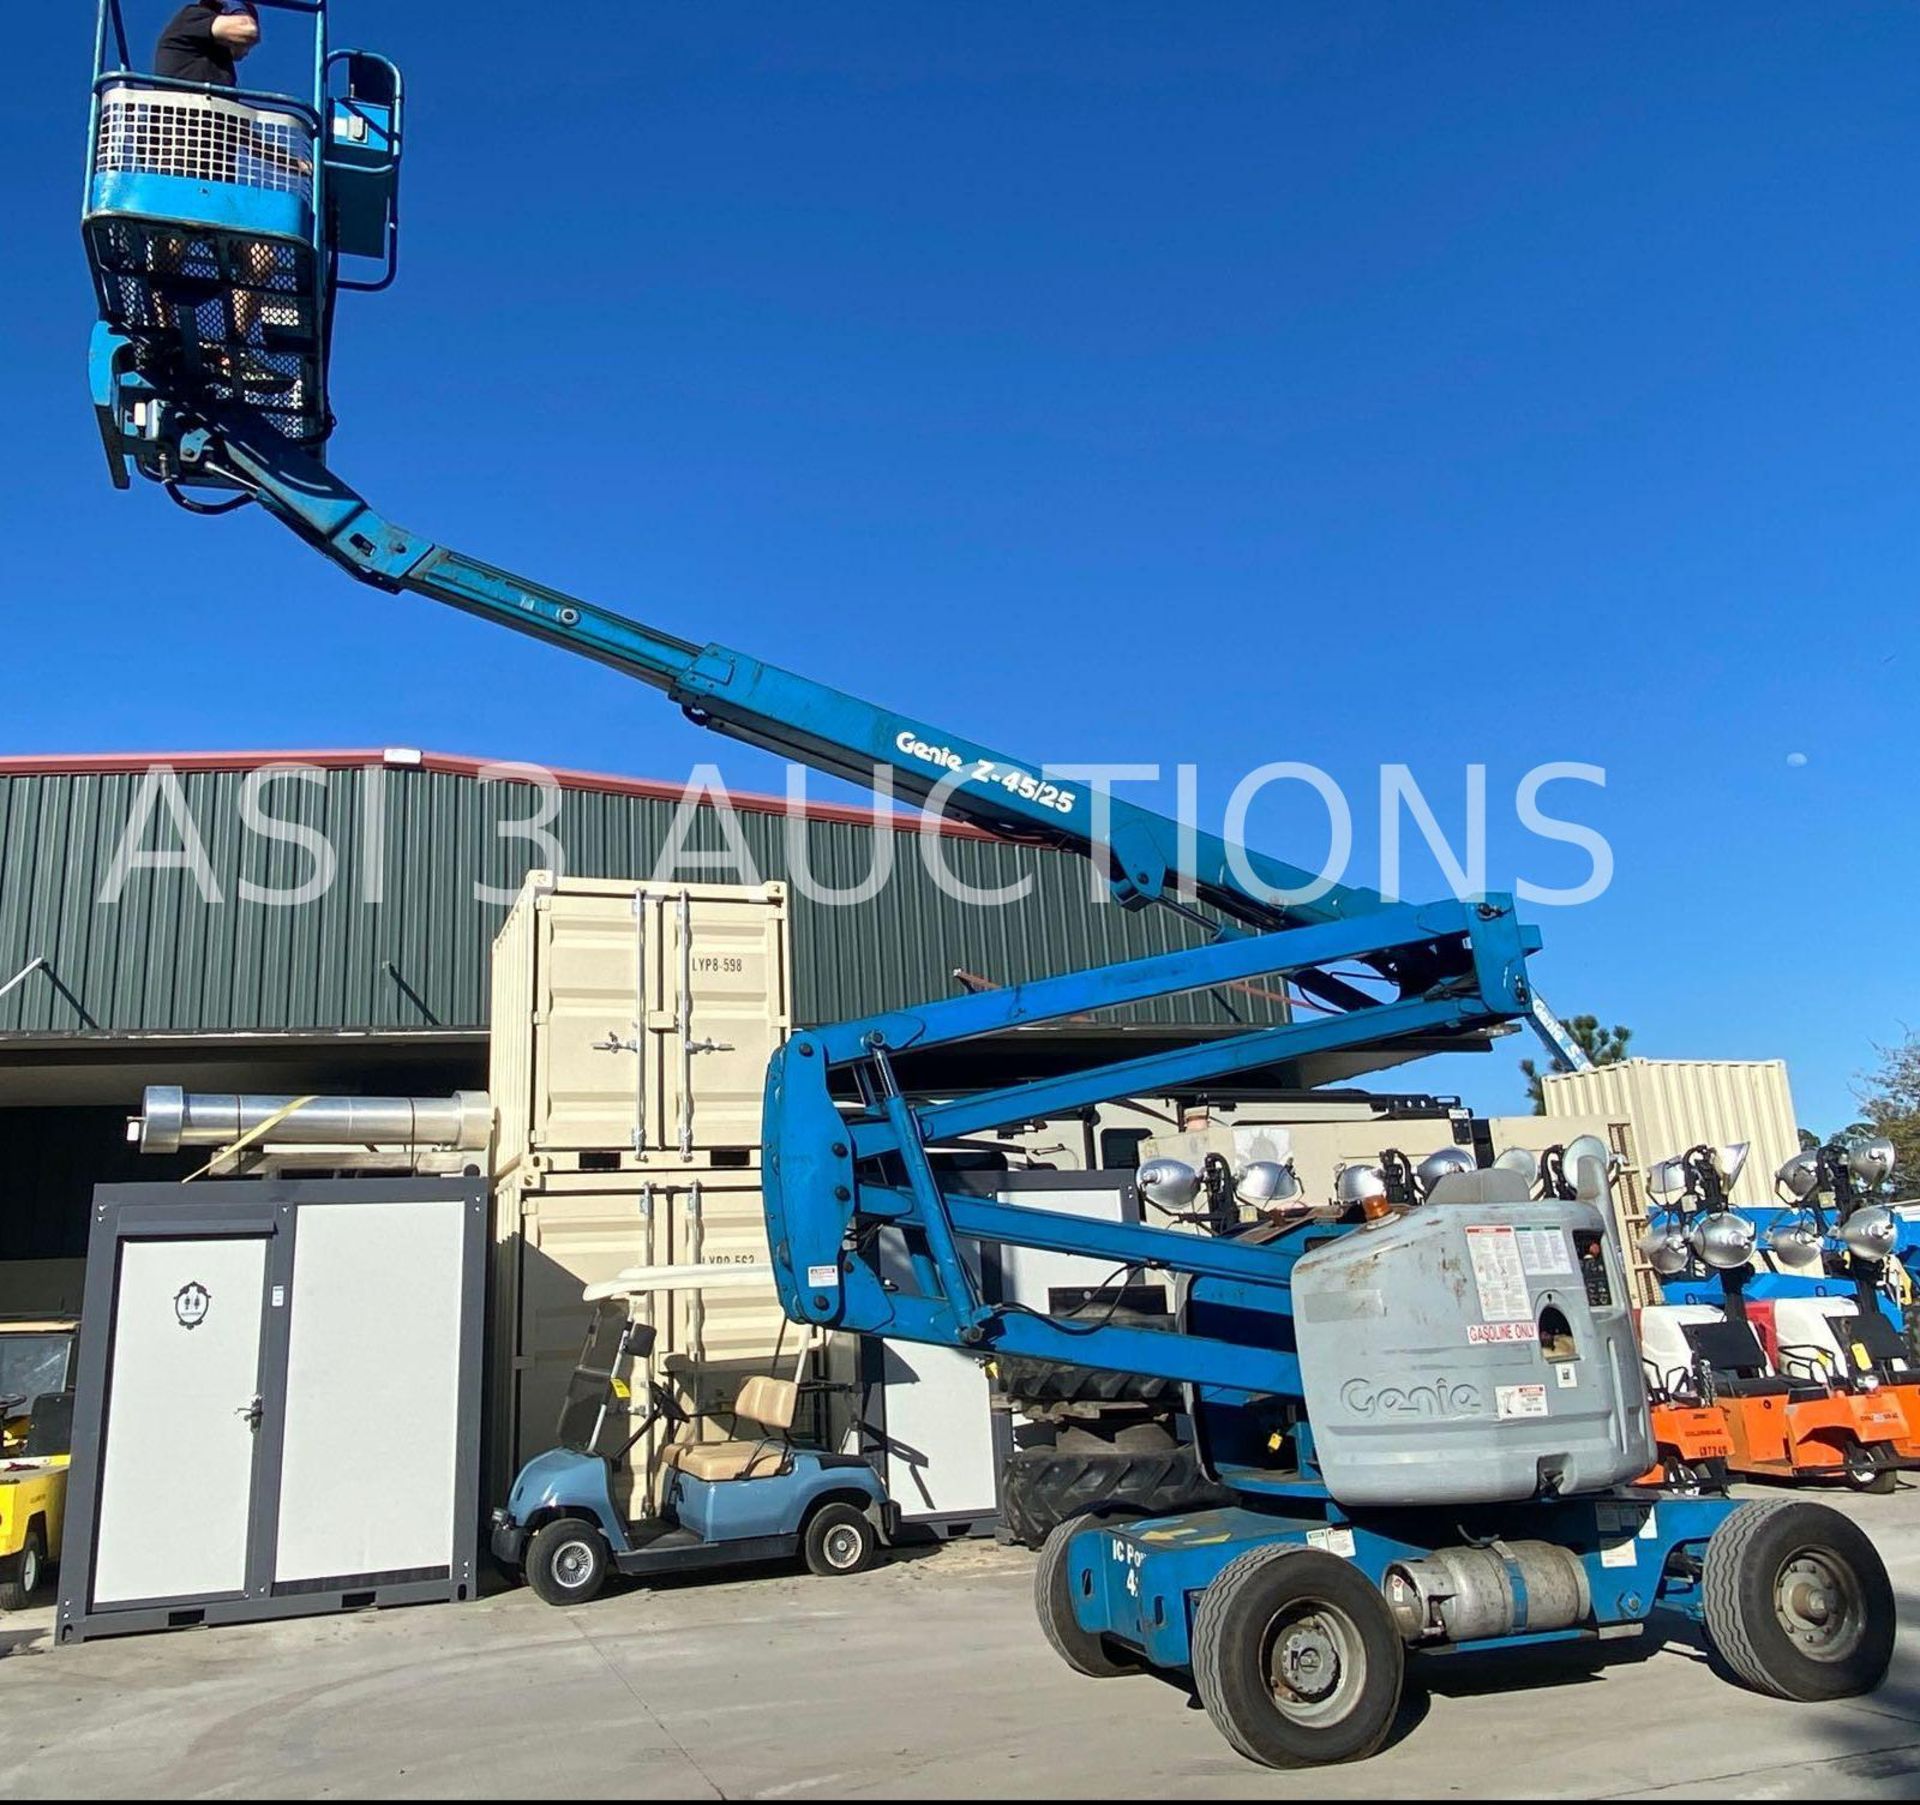 GENIE Z-45/25 DUAL FUEL ARTICULATING BOOM LIFT, FOAM FILLED TIRES, EXTRA WEIGHT UNDERNEATH, 45